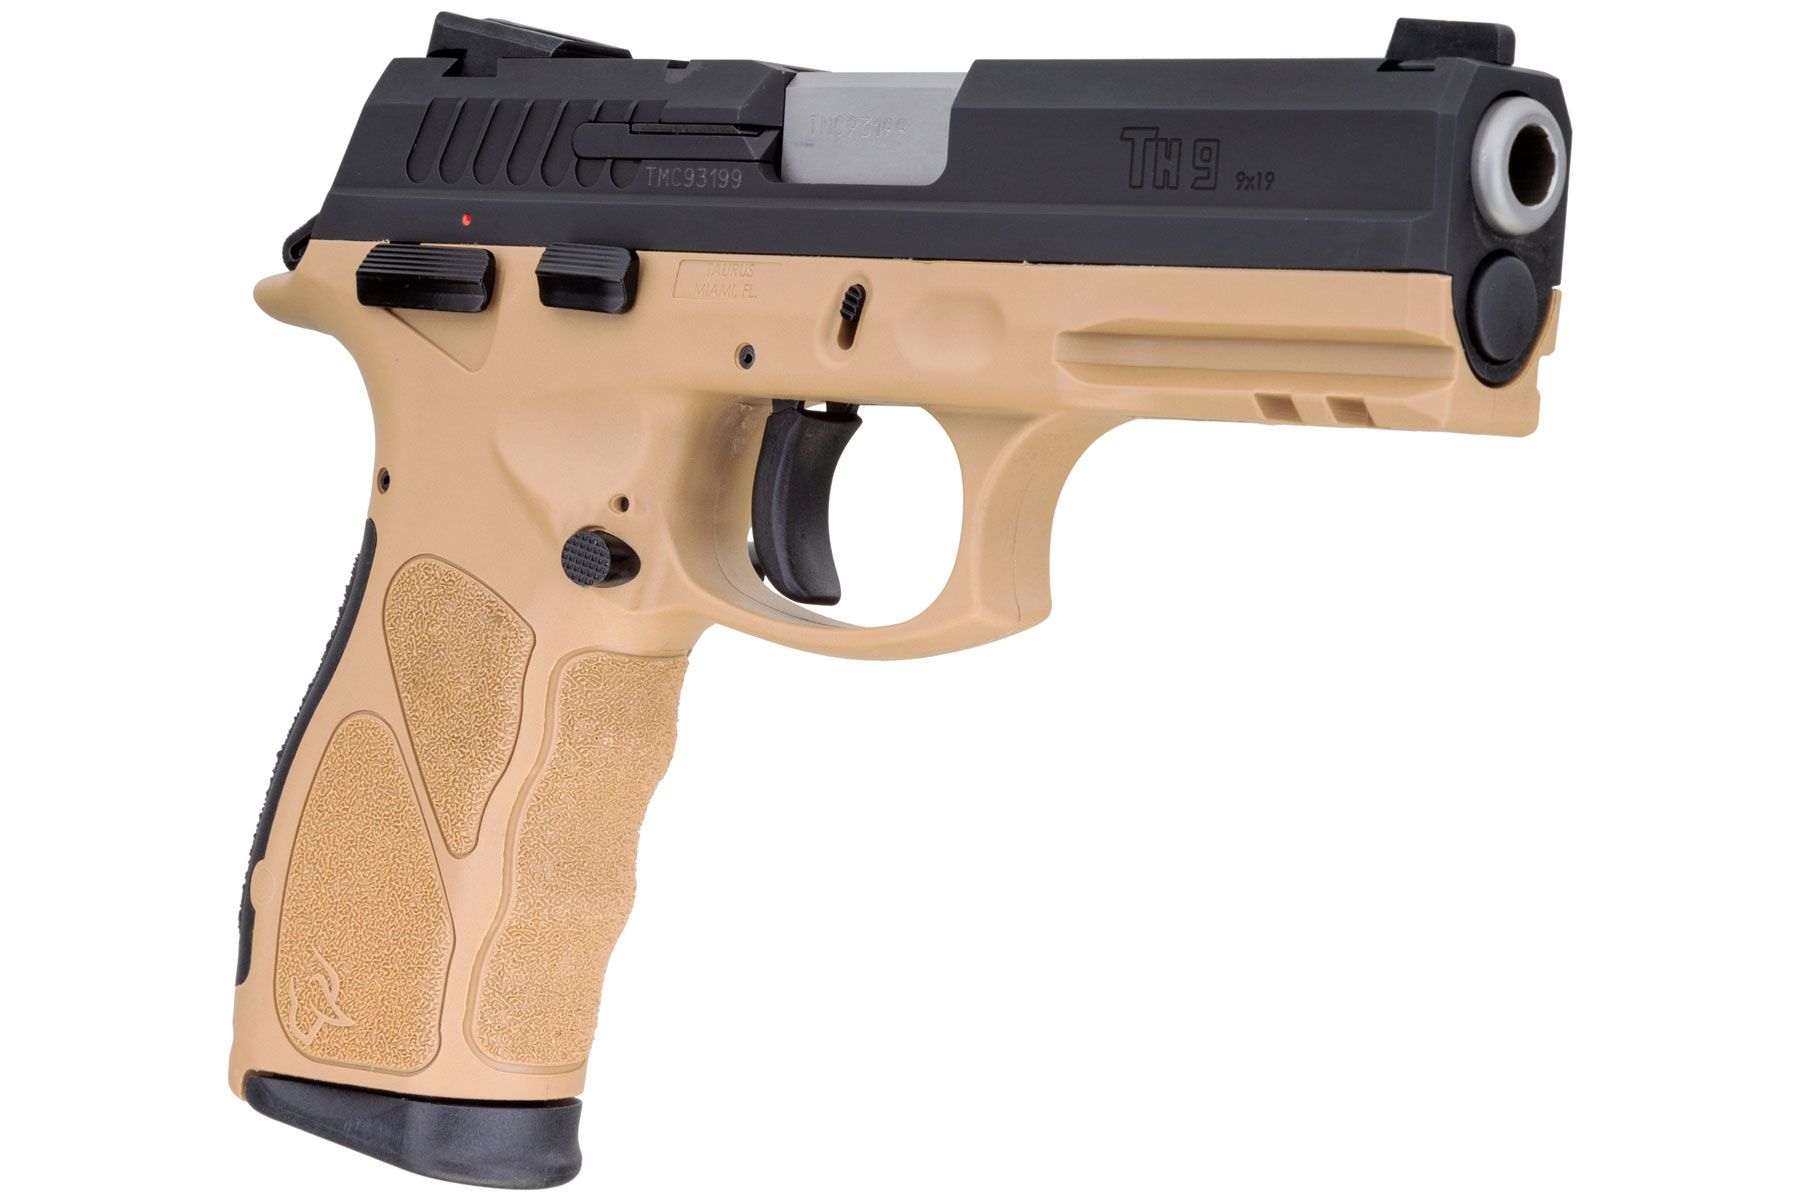 Taurus TH Matte Black / Tan 9mm Luger Full Size 17 Rds.